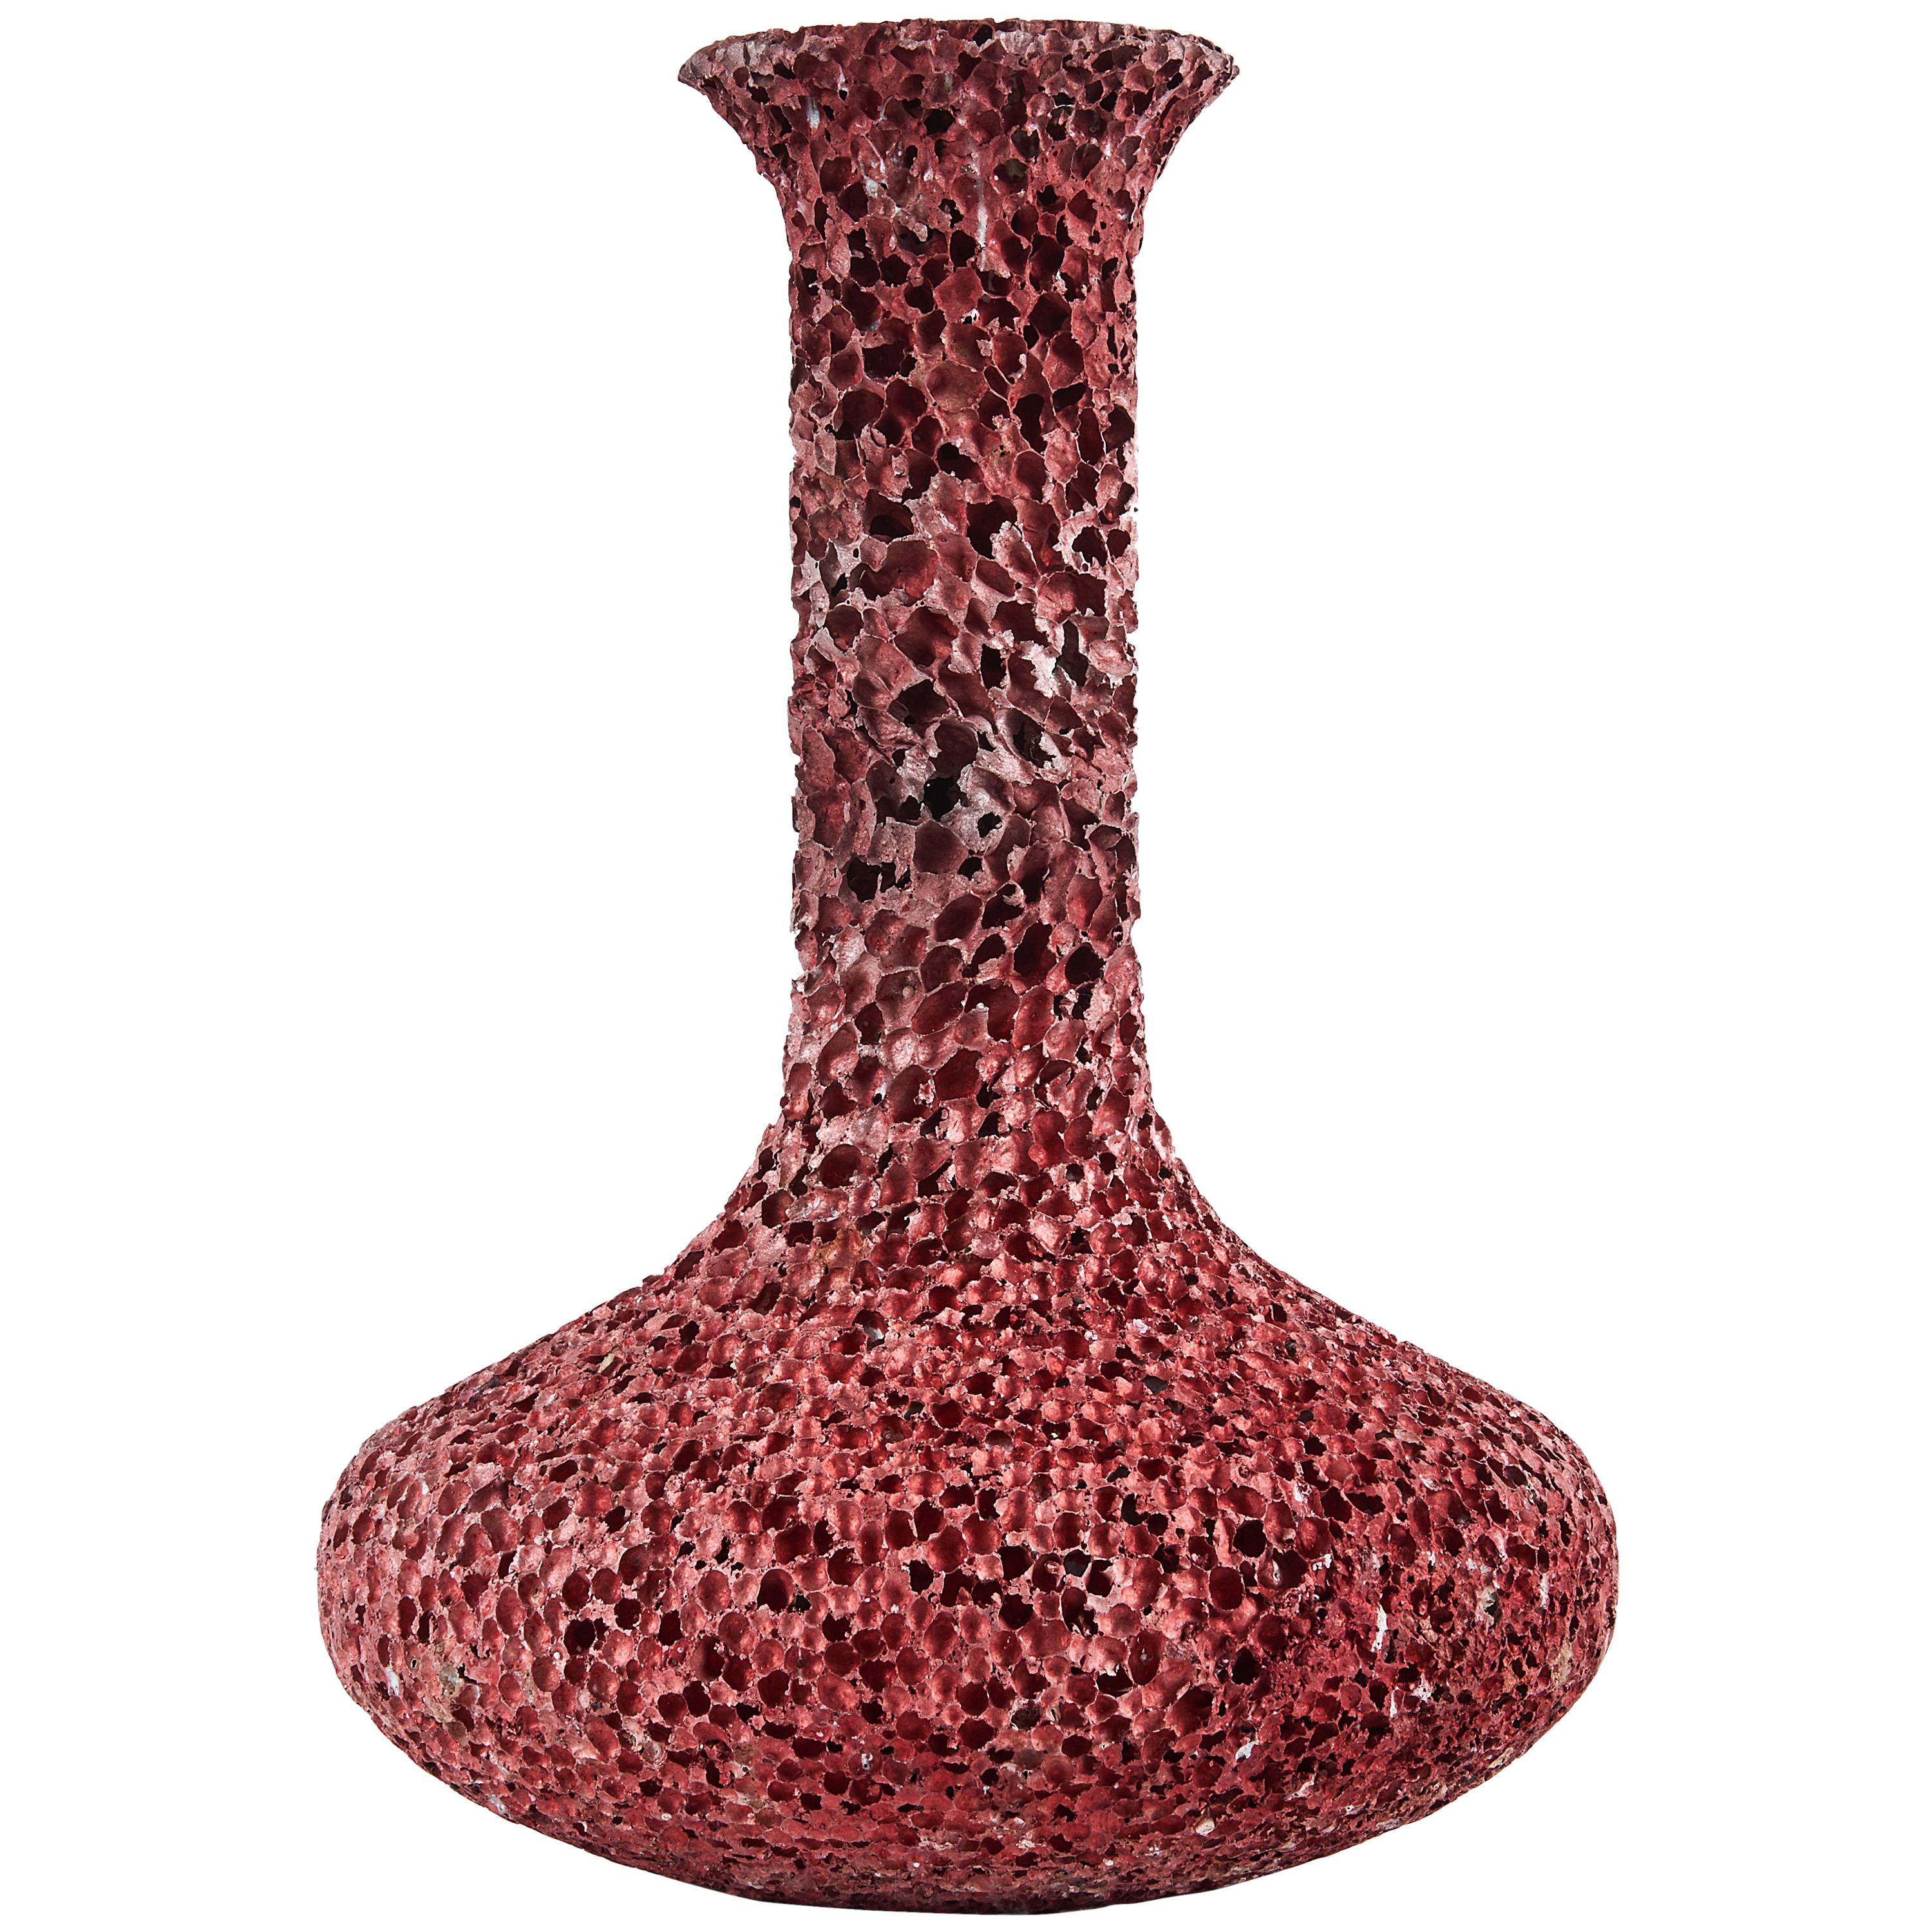 Dynasty Vase #4 - Fire Colored Table Vessel Aluminium Foam by Michael Young